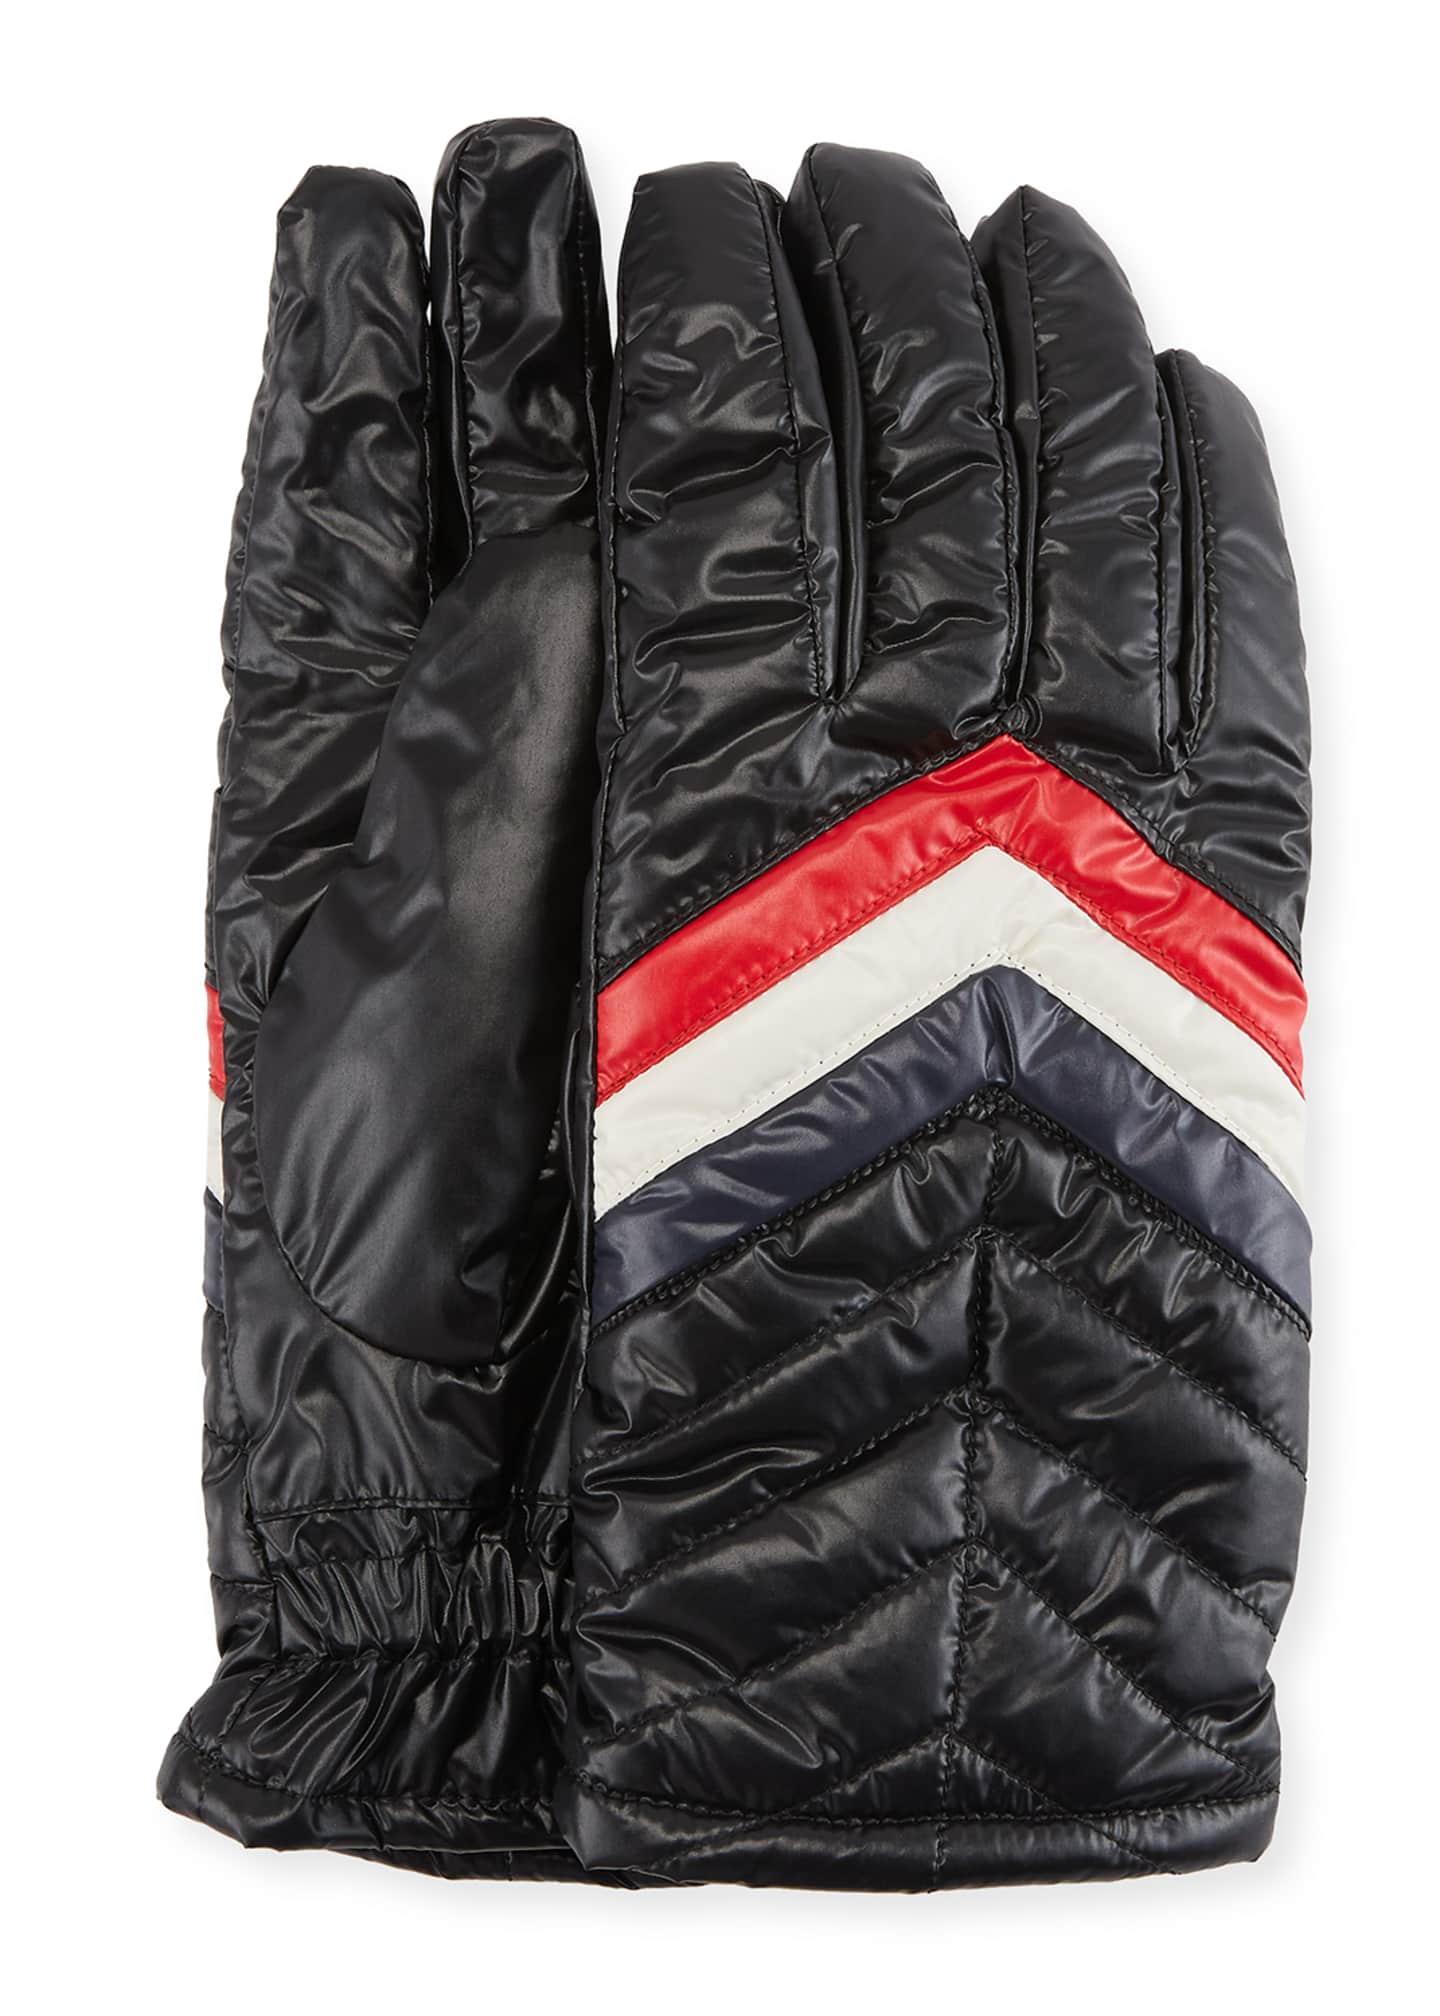 mens quilted gloves